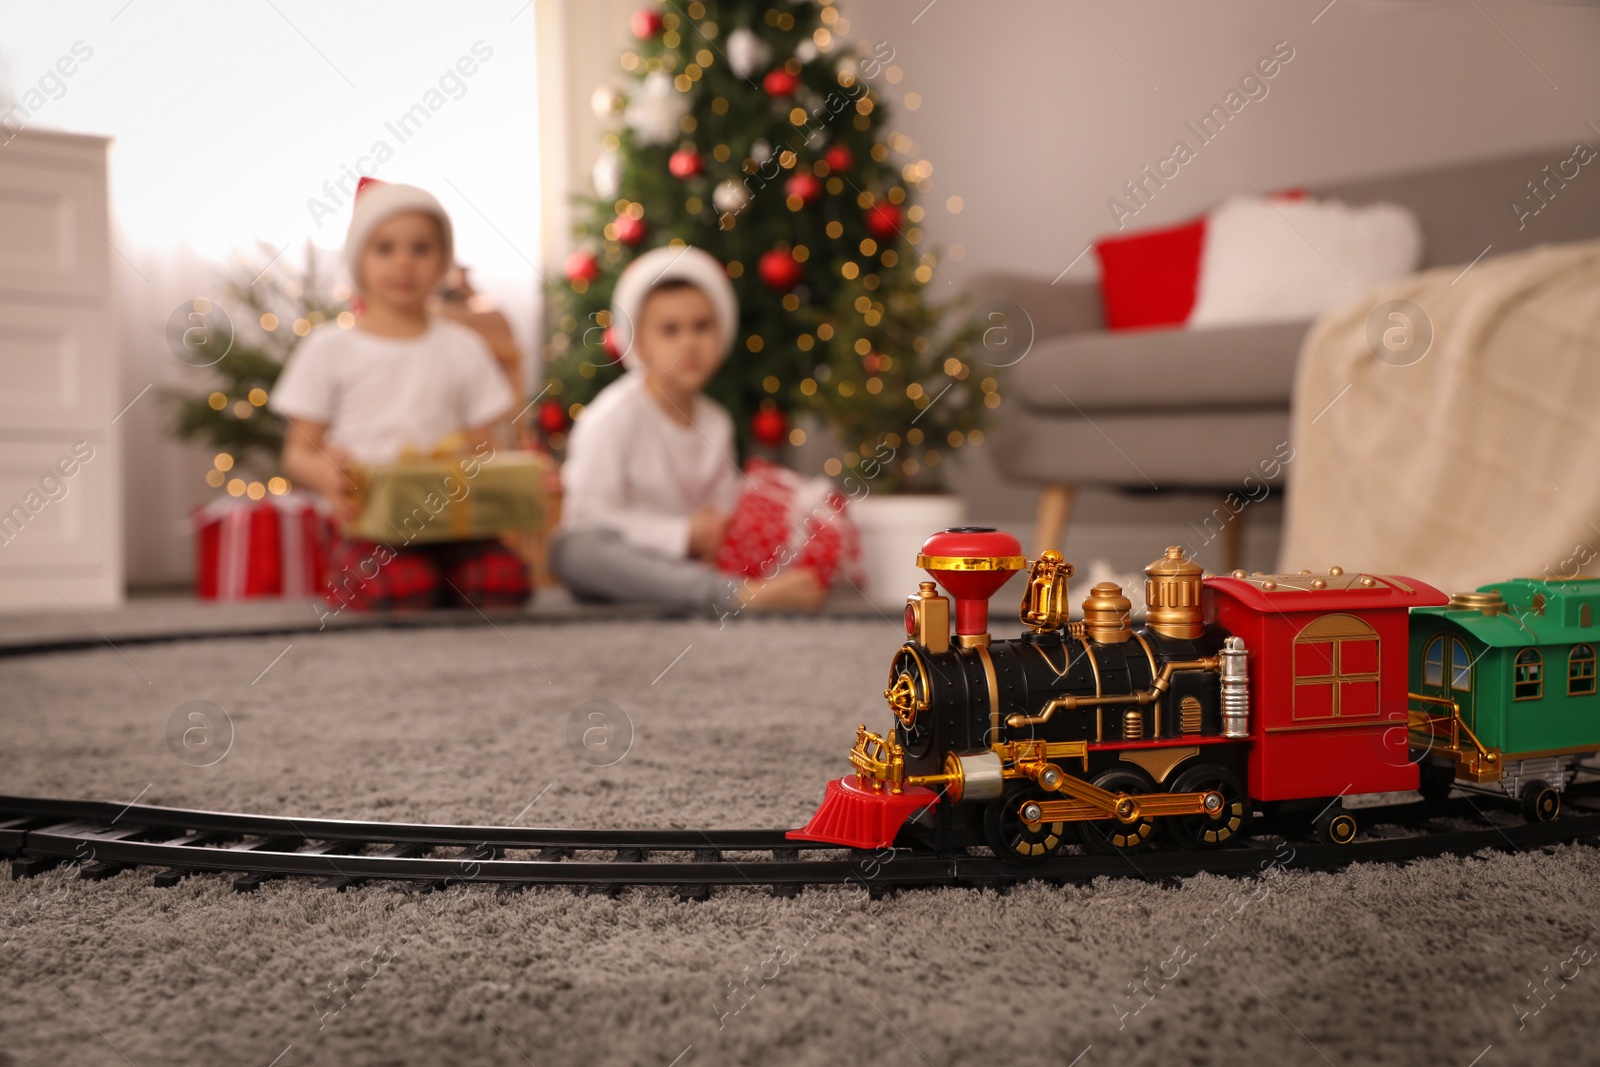 Photo of Children playing with colorful toy in room decorated for Christmas, focus on train